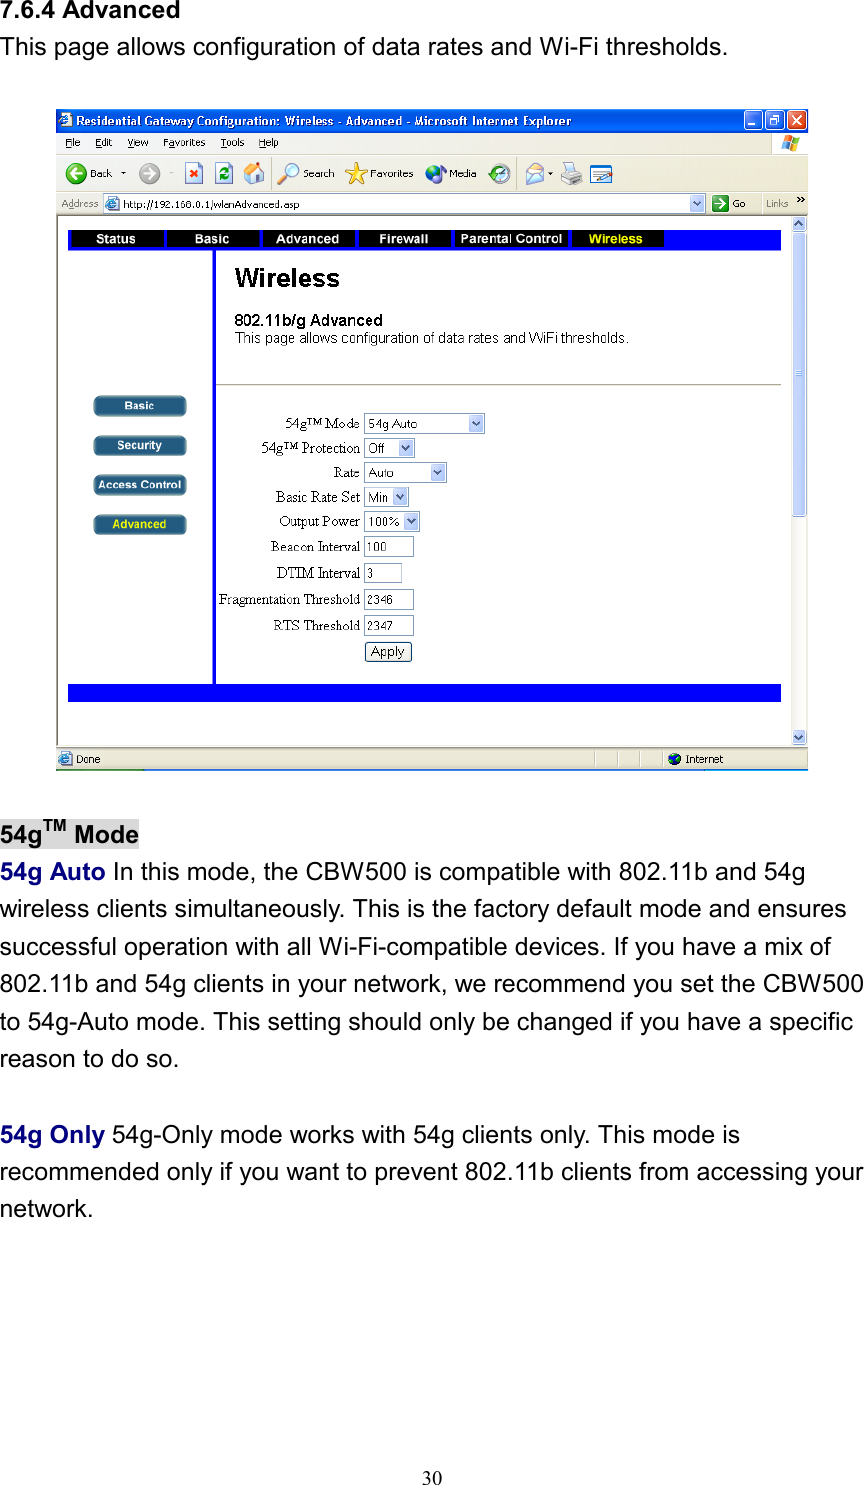 7.6.4 Advanced This page allows configuration of data rates and Wi-Fi thresholds.    54gTM Mode 54g Auto In this mode, the CBW500 is compatible with 802.11b and 54g wireless clients simultaneously. This is the factory default mode and ensures successful operation with all Wi-Fi-compatible devices. If you have a mix of 802.11b and 54g clients in your network, we recommend you set the CBW500 to 54g-Auto mode. This setting should only be changed if you have a specific reason to do so.  54g Only 54g-Only mode works with 54g clients only. This mode is recommended only if you want to prevent 802.11b clients from accessing your network.   30